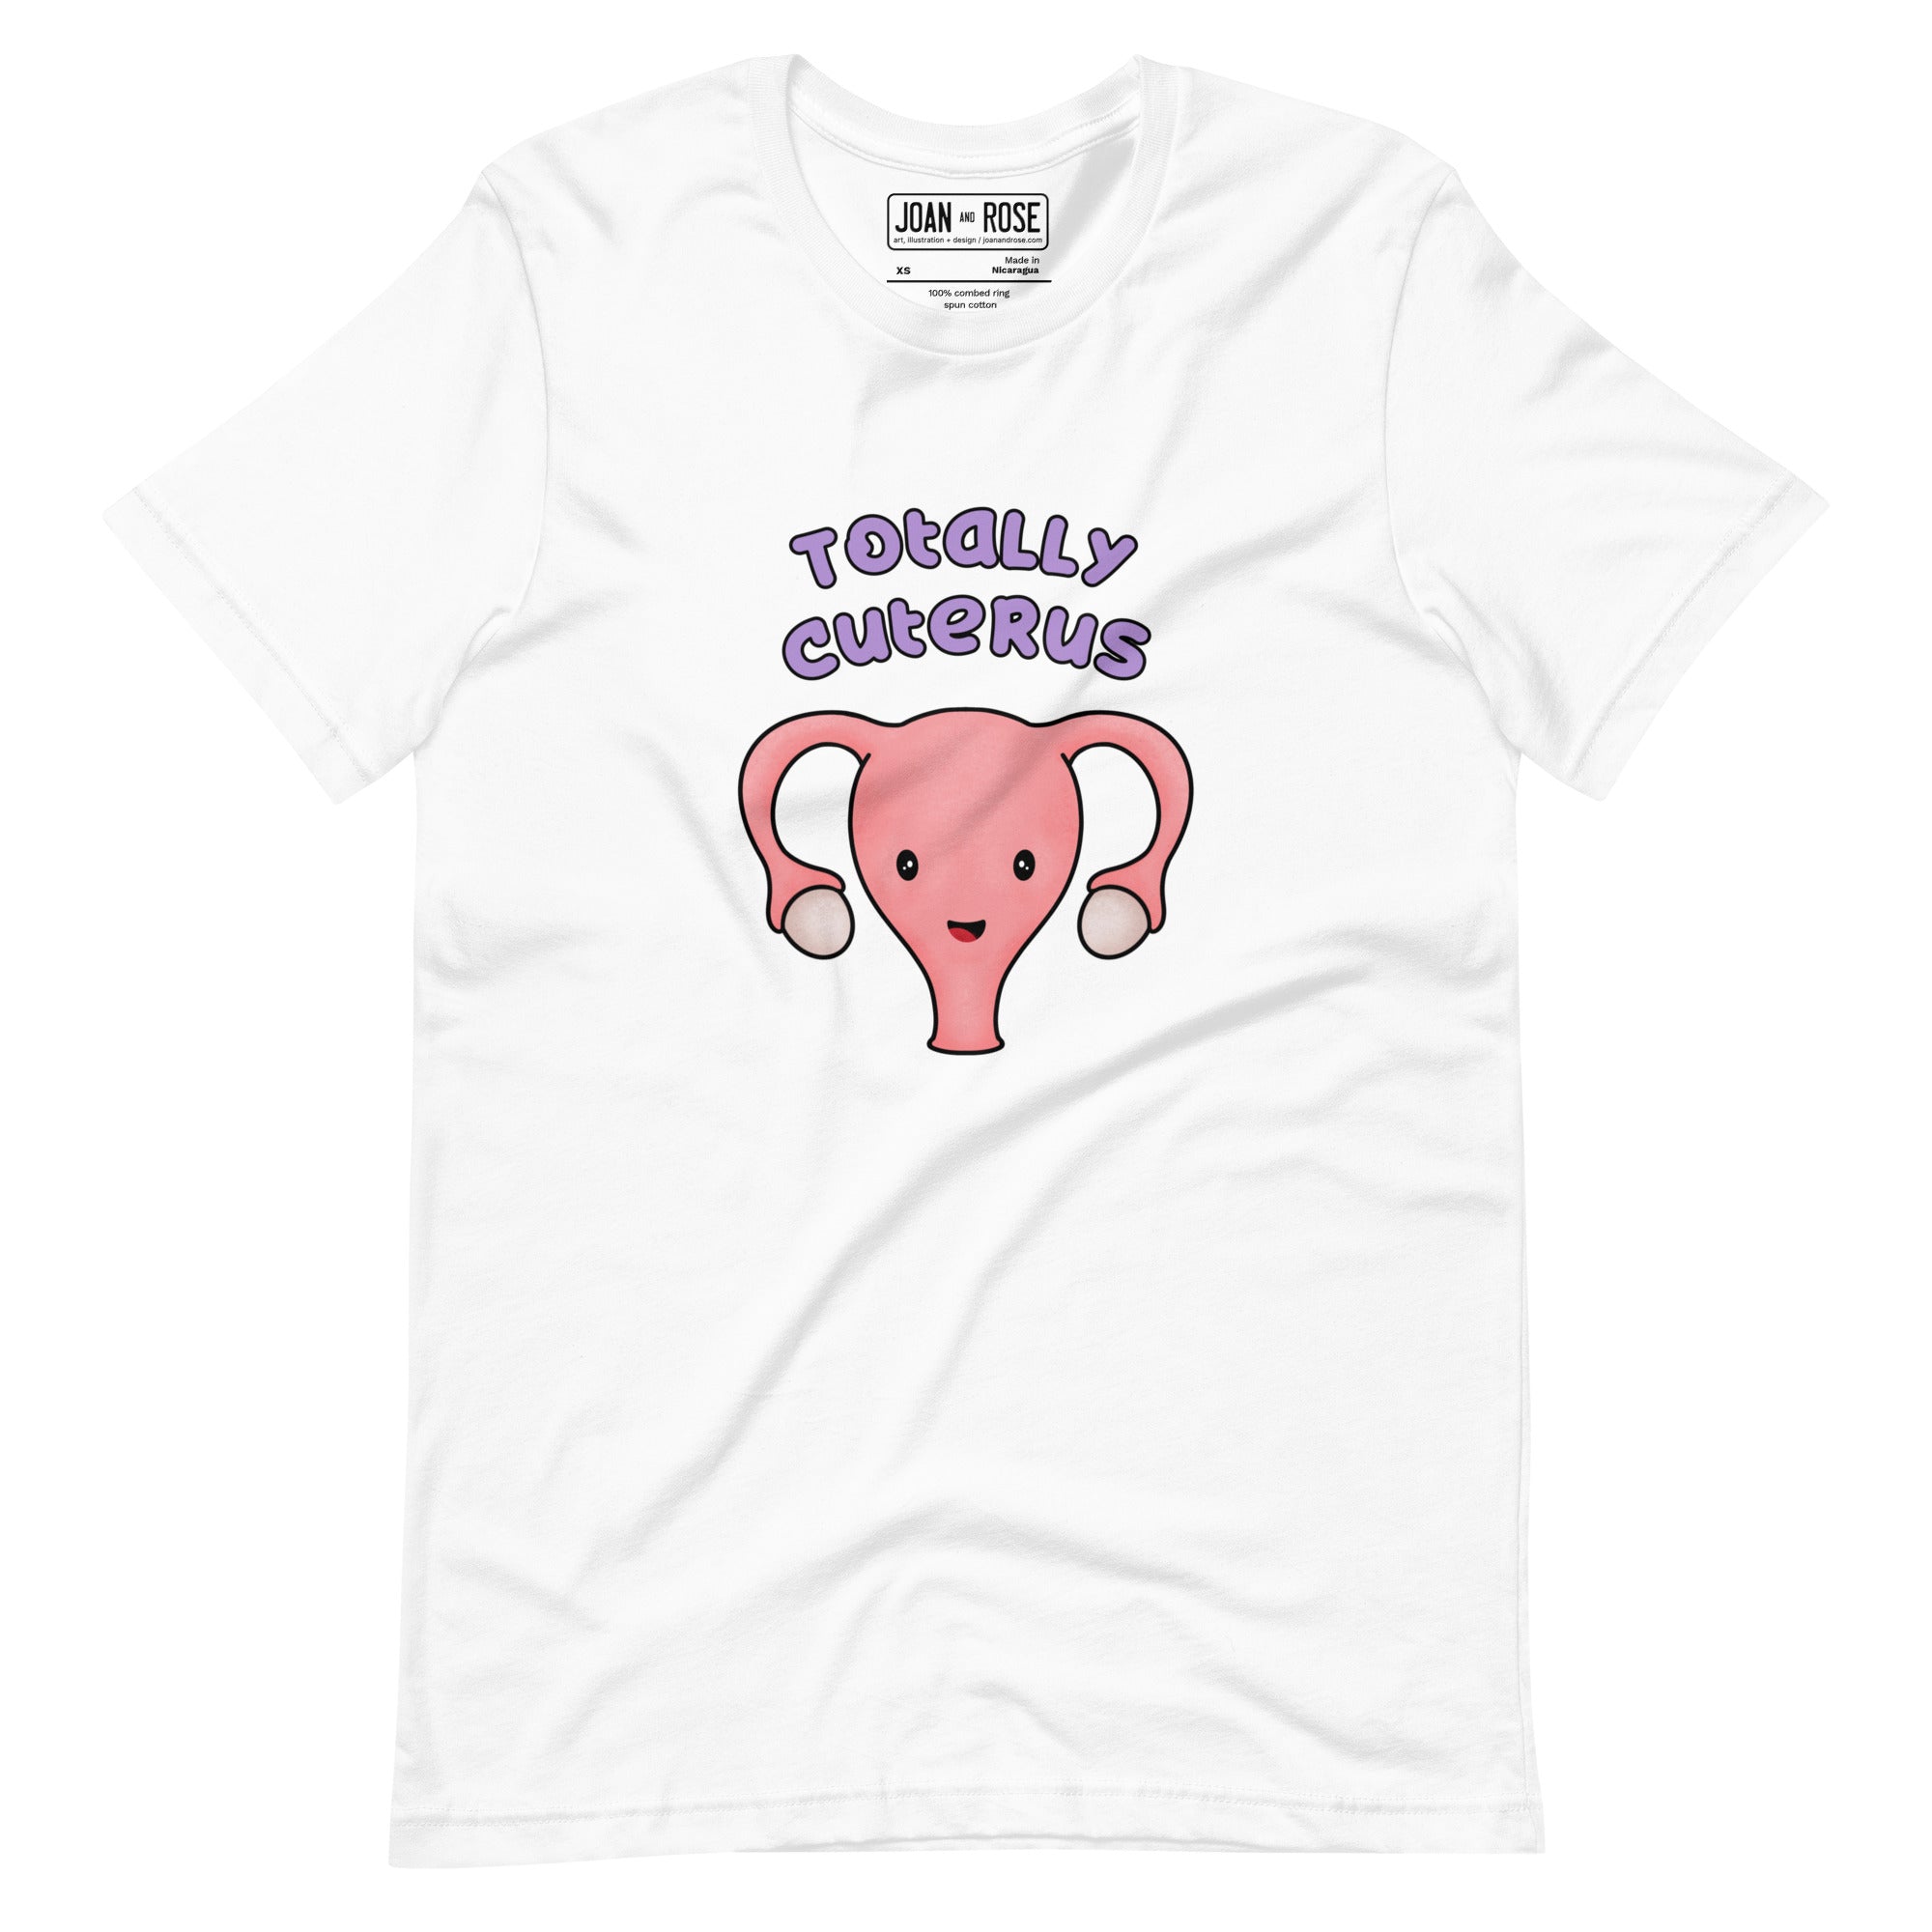 White coloured  t-shirt with an illustration of a cute uterus character smiling with the text in purple 'Totally Cuterus'